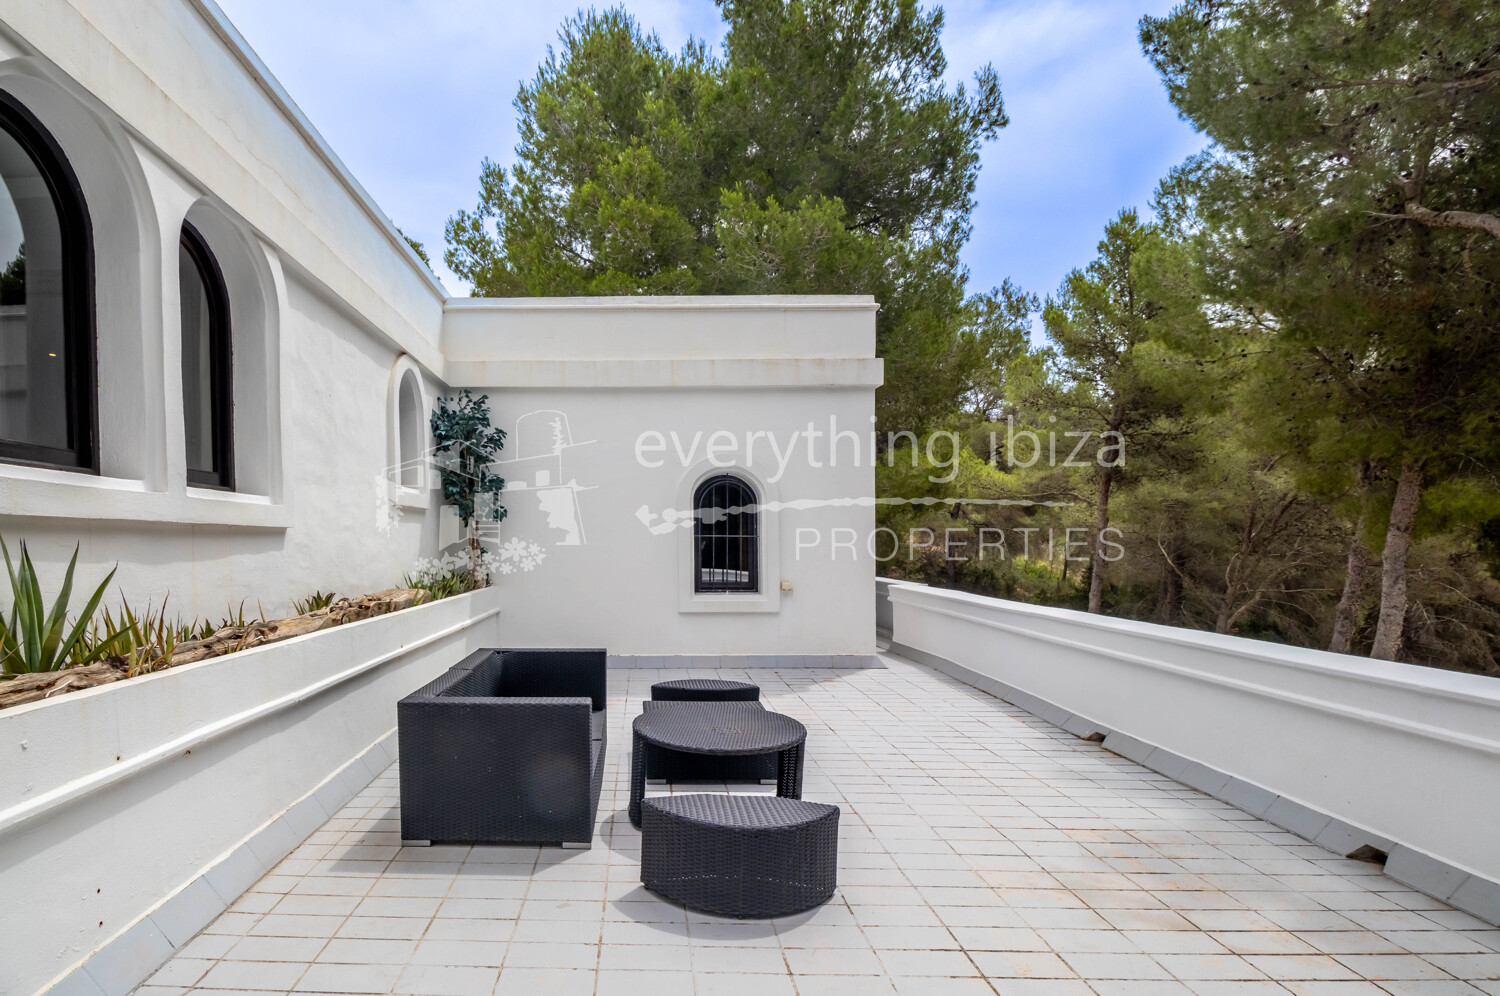 Beautiful Villa with Tourist License Two Guest Anexes and Large Rural Plot in Sa Carroca, ref. 1667, for sale in Ibiza by everything ibiza Properties